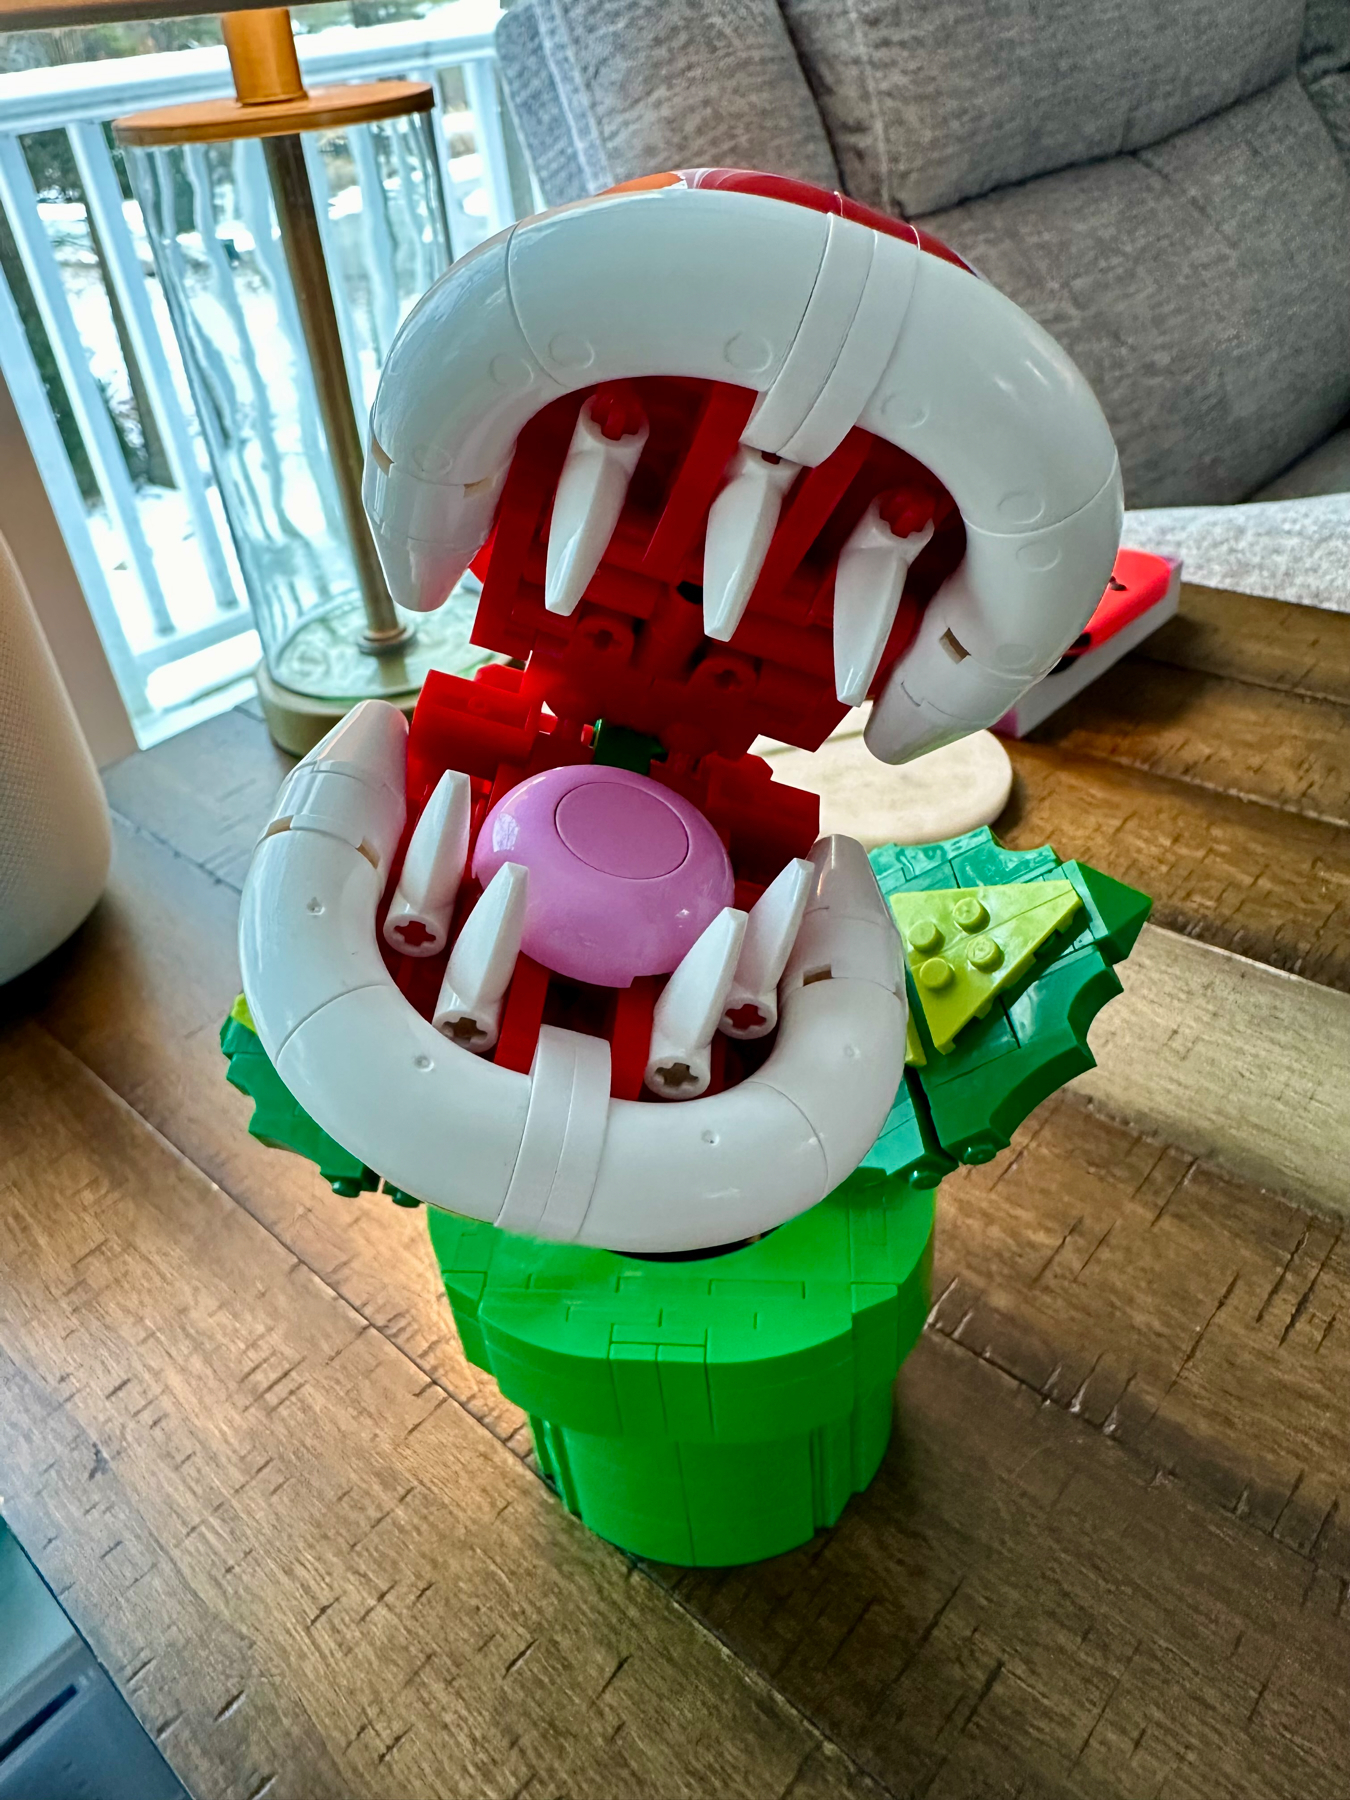 A colorful LEGO model of a flower in a green pot, featuring white petals with red details and a pink center, displayed indoors with a chair and balcony in the background.